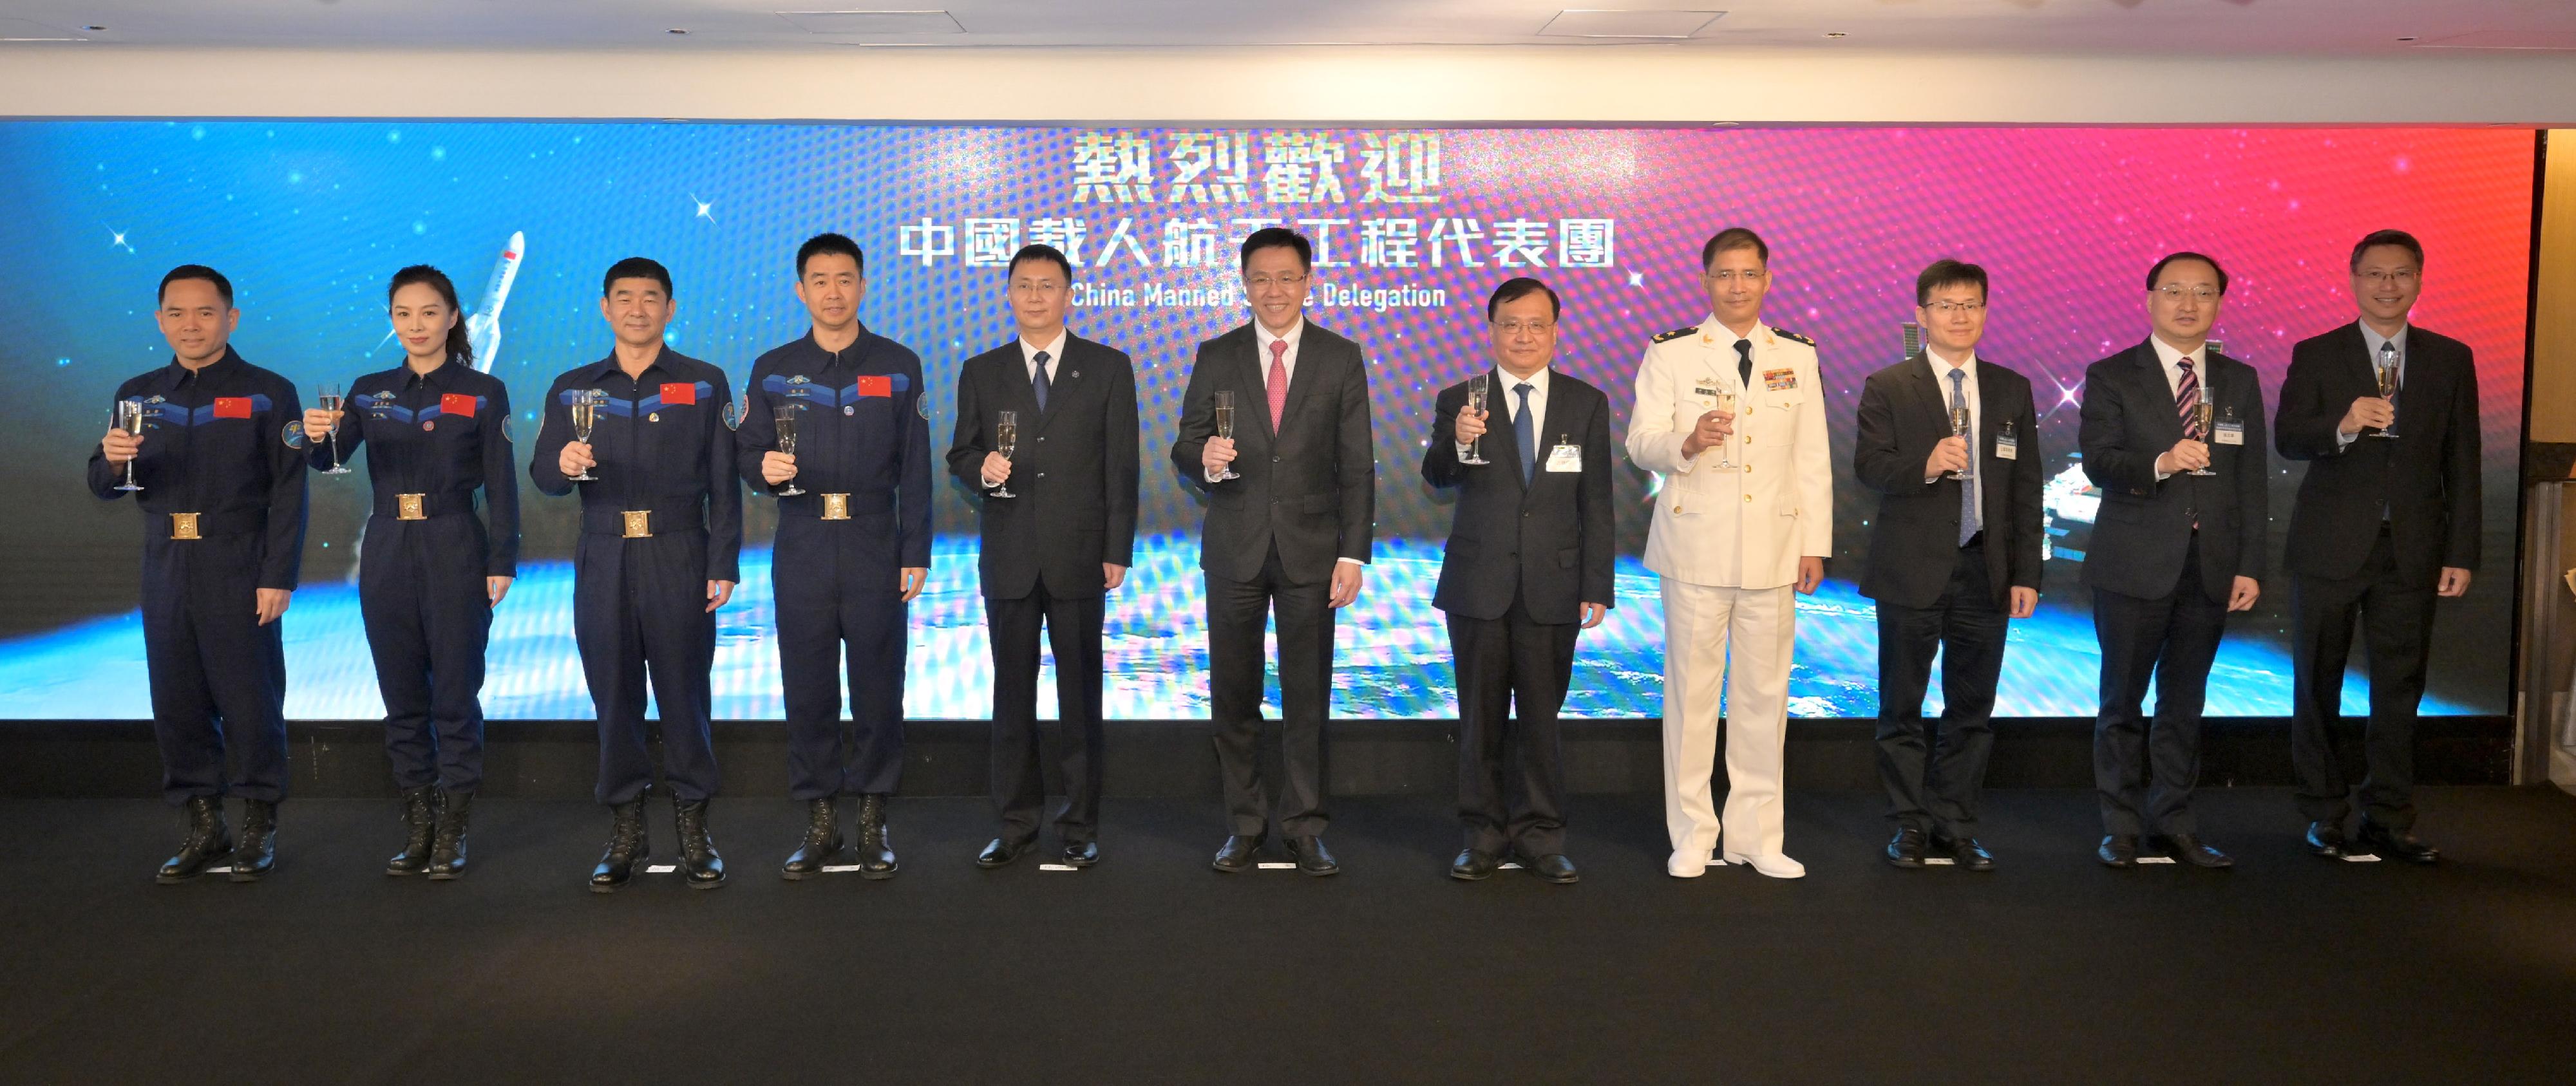 The China Manned Space delegation continued their visit to Hong Kong today (November 30) and attended a luncheon hosted by the Innovation, Technology and Industry Bureau to meet with the innovation and technology tertiary education sectors and exchange views. Photo shows (from left) Shenzhou-15 astronaut Mr Zhang Lu; Shenzhou-13 astronaut Ms Wang Yaping; Shenzhou-12 astronaut Mr Liu Boming; Shenzhou-14 mission commander Mr Chen Dong; the leader of the delegation and Deputy Director General of the China Manned Space Agency, Mr Lin Xiqiang; the Secretary for Innovation, Technology and Industry, Professor Sun Dong; Deputy Commissioner of the Office of the Commissioner of the Ministry of Foreign Affairs of the People's Republic of China in the Hong Kong Special Administrative Region (HKSAR) Mr Fang Jianming; Deputy Commander of the Chinese People's Liberation Army Hong Kong Garrison Navy Rear Admiral Tan Zhiwei; the Director-General of the Department of Educational, Scientific and Technological Affairs of the Liaison Office of the Central People's Government in the HKSAR, Dr Wang Weiming; the Director-General of the Department of Youth Affairs of the Liaison Office of the Central People's Government in the HKSAR, Mr Zhang Zhihua; the Permanent Secretary for Innovation, Technology and Industry, Mr Eddie Mak, officiating at the toasting ceremony. 